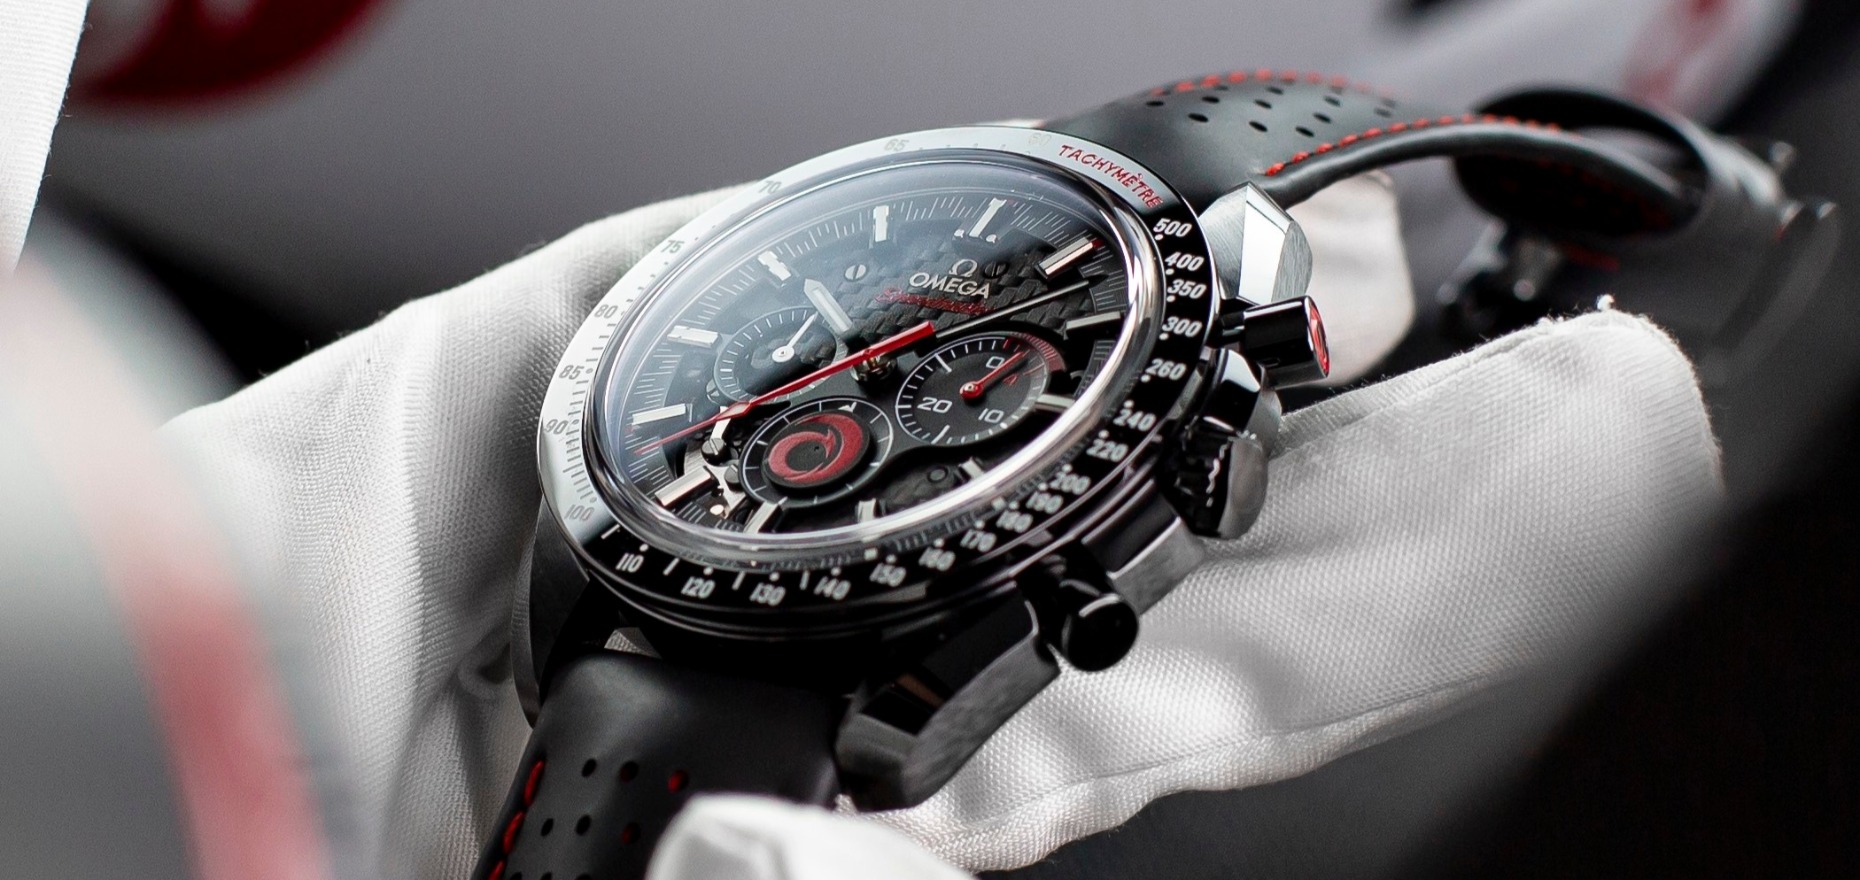 Omega Speedmaster Dark Side of the Moon Alinghi – To the joint partnership